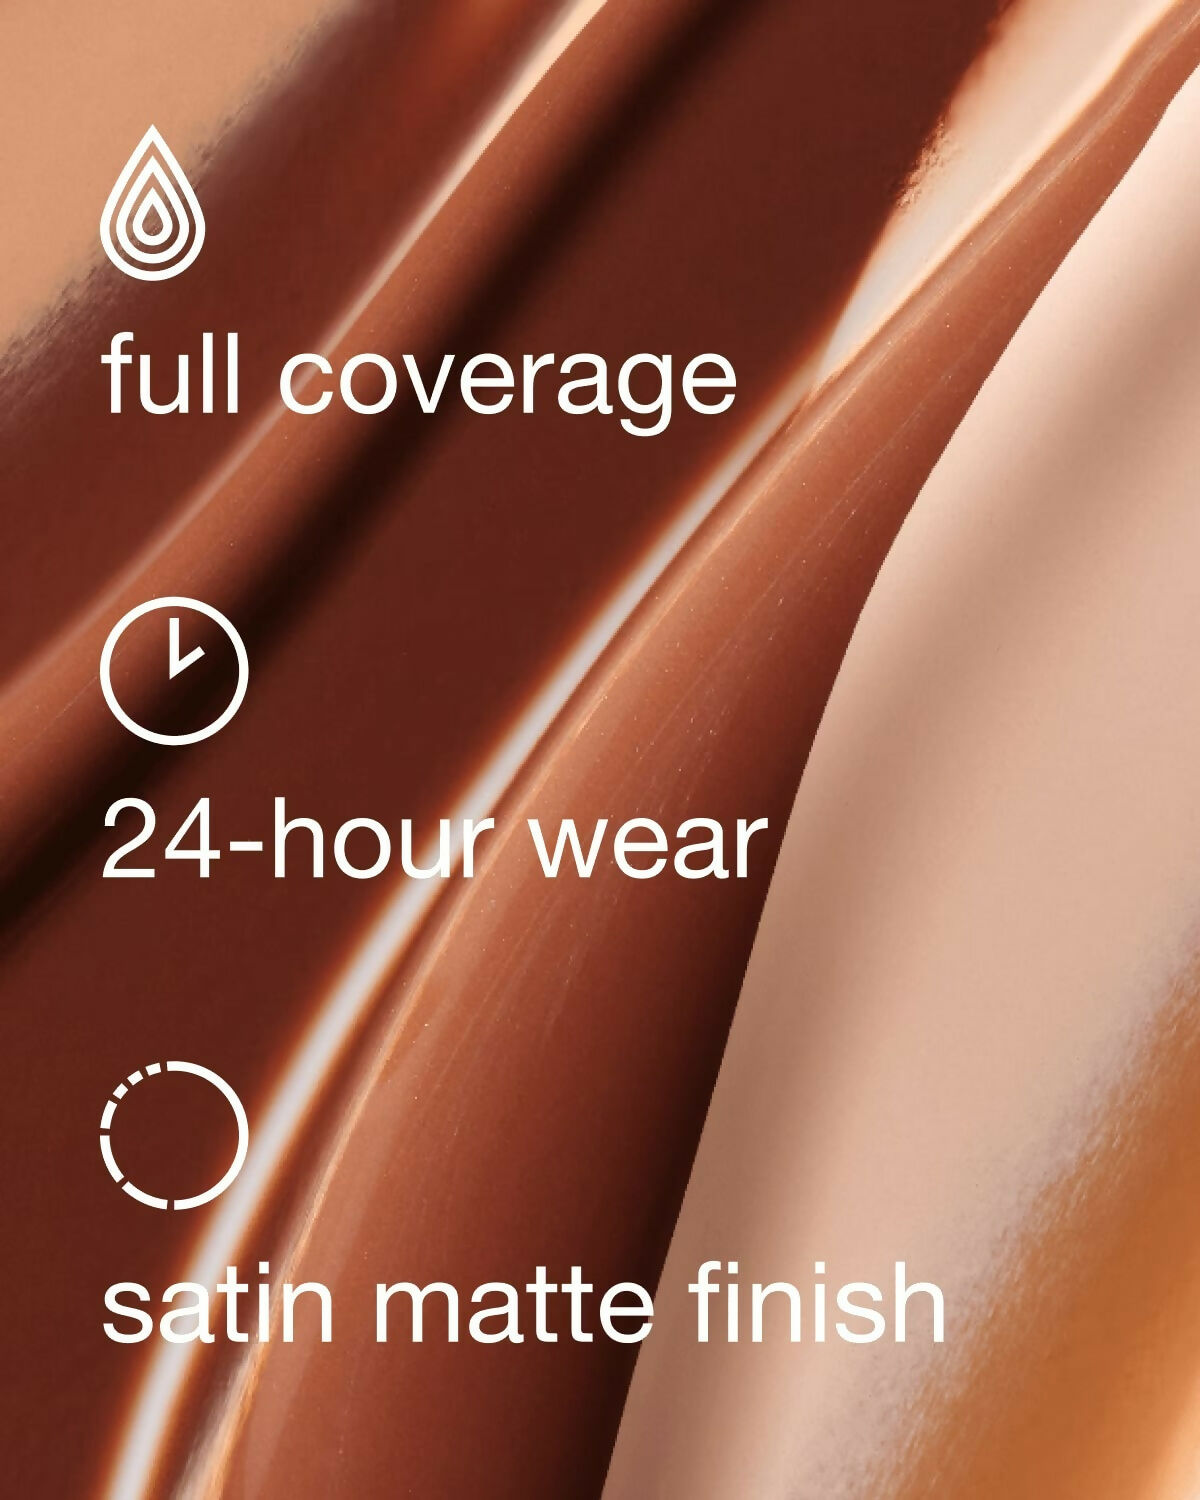 Clinique Even Better Clinical Serum Foundation SPF 20 - WN 80 Tawnied Beige (M) - Distacart